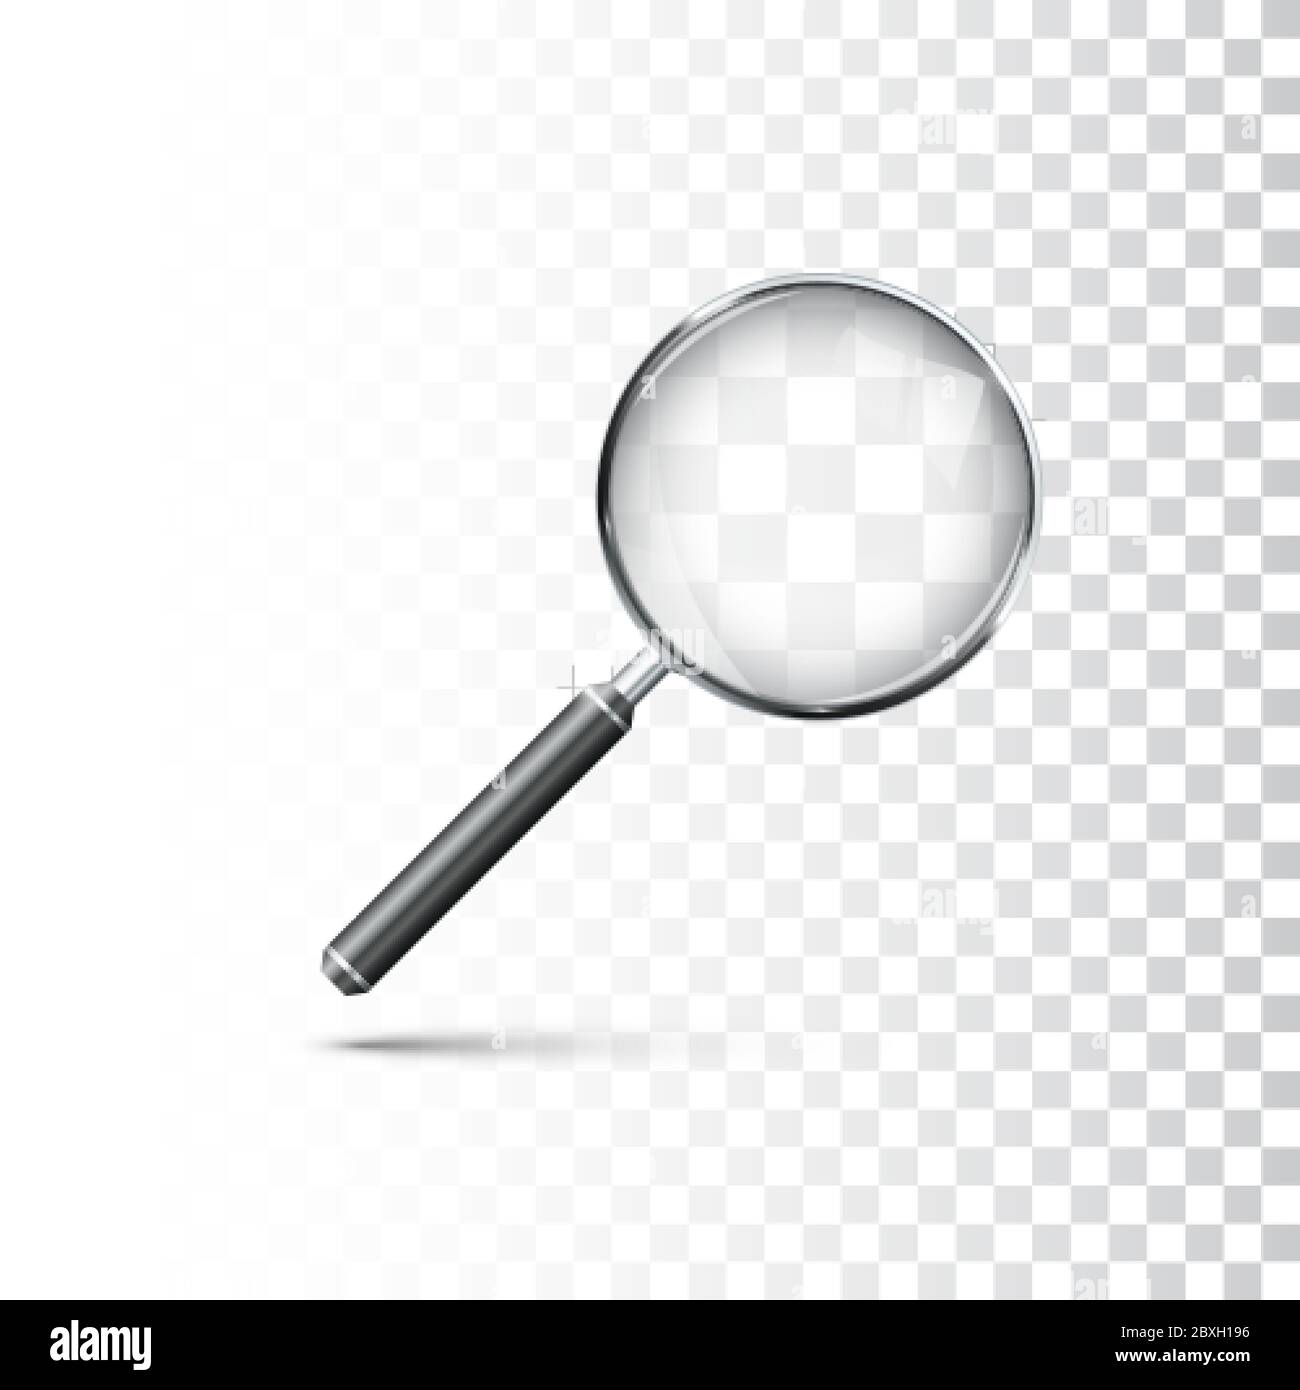 Magnifying glass with metal frame and black handle. Realistic style icon. Vector illustration isolated on transparent background Stock Vector